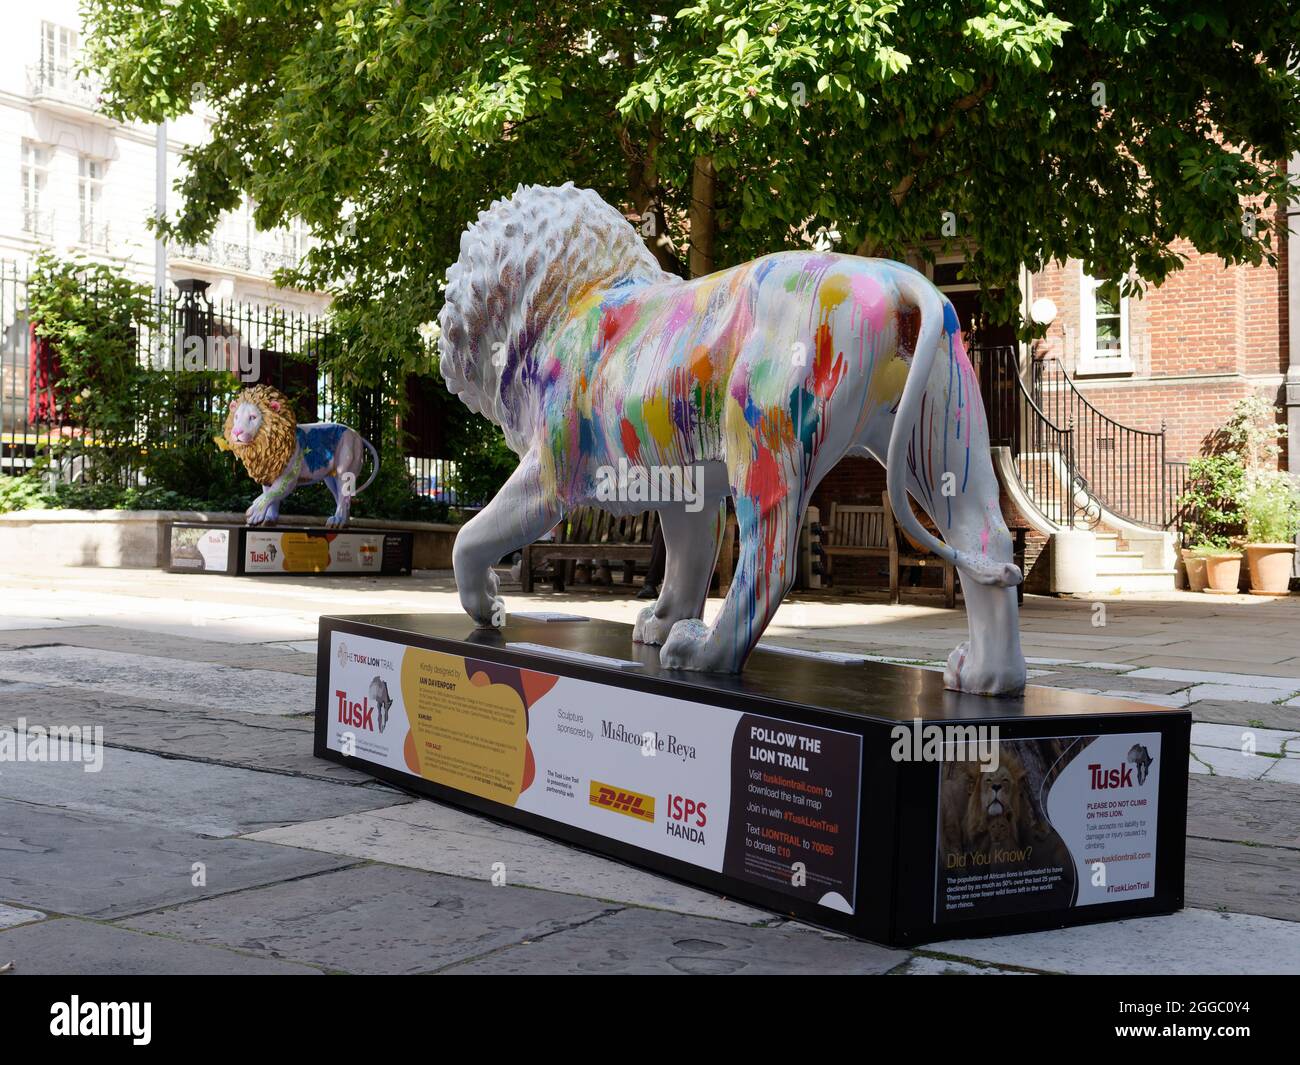 London, Greater London, England, August 24 2021: The London Pride Tusk Lion Trail, Kamuro by Ian Davenport with Worker by Helen Downie behind. Stock Photo